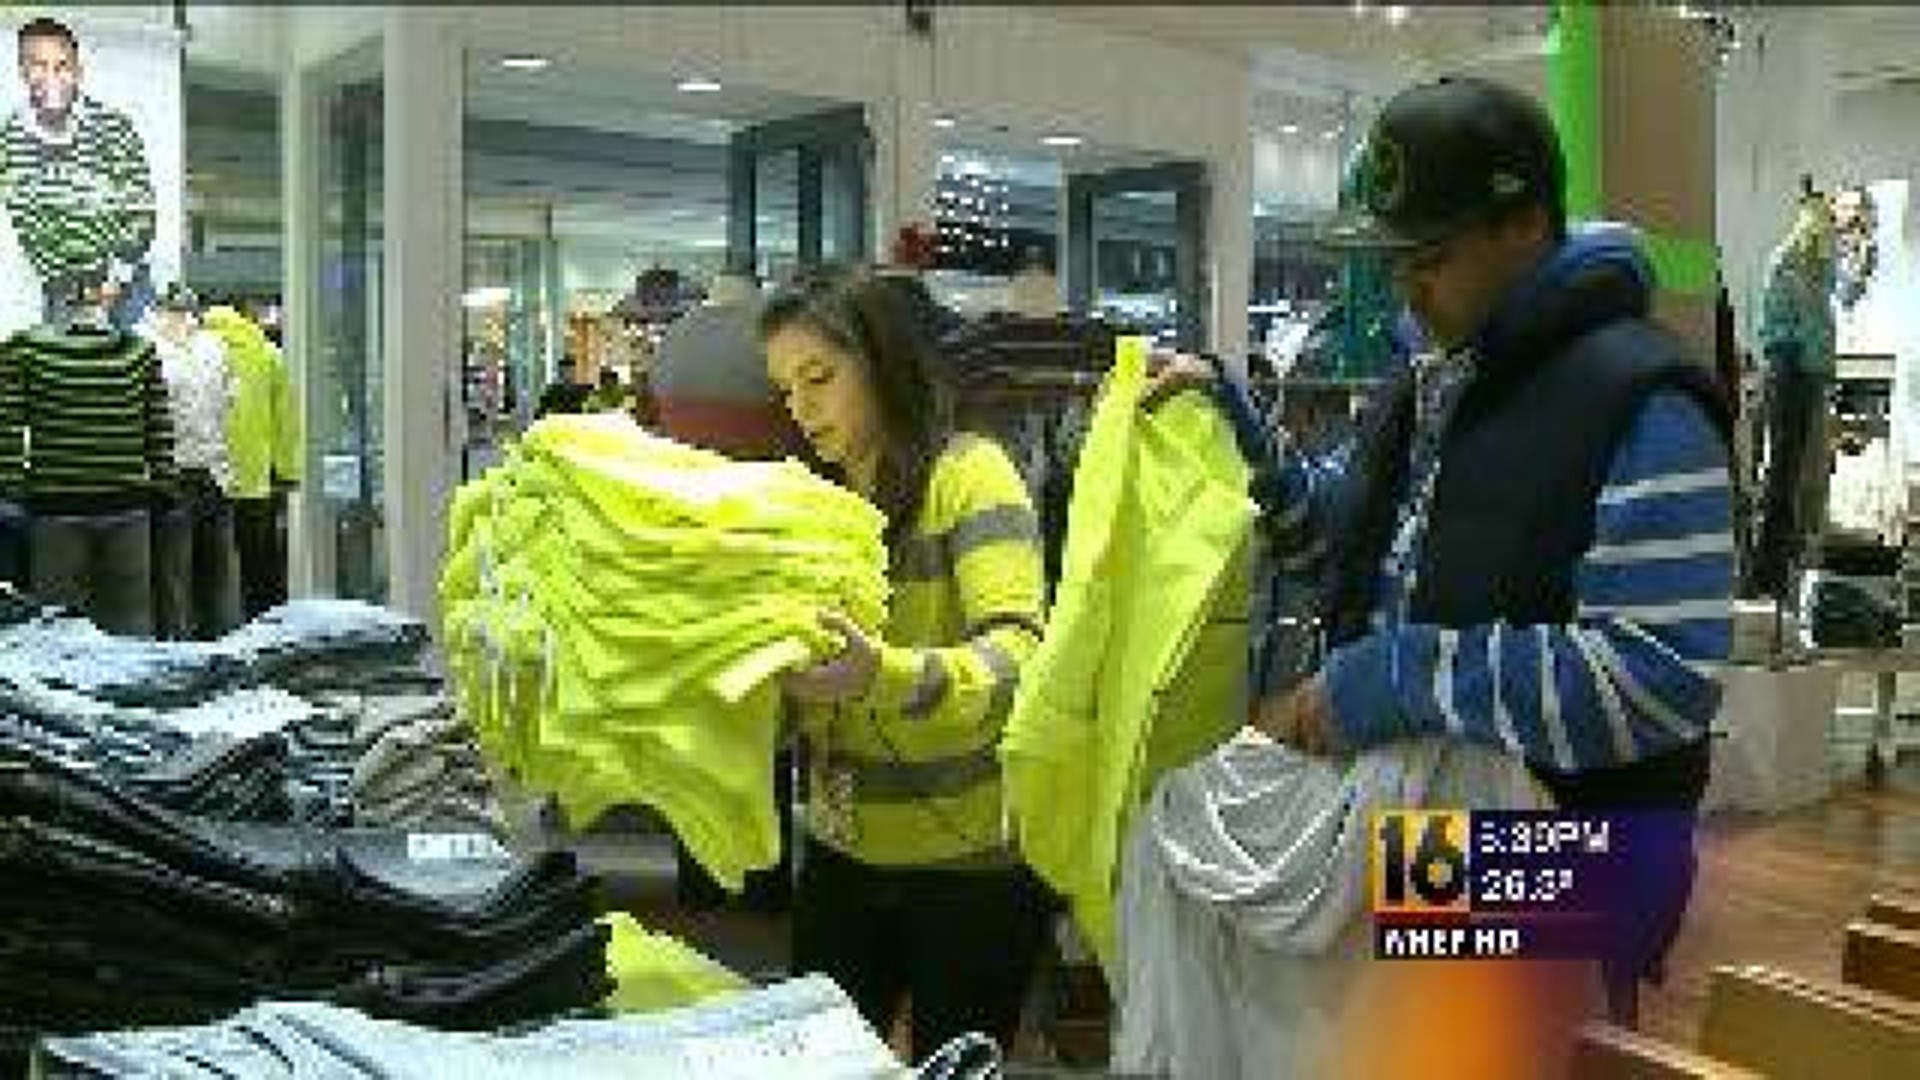 Store Donates Shopping Spree for Family in Need